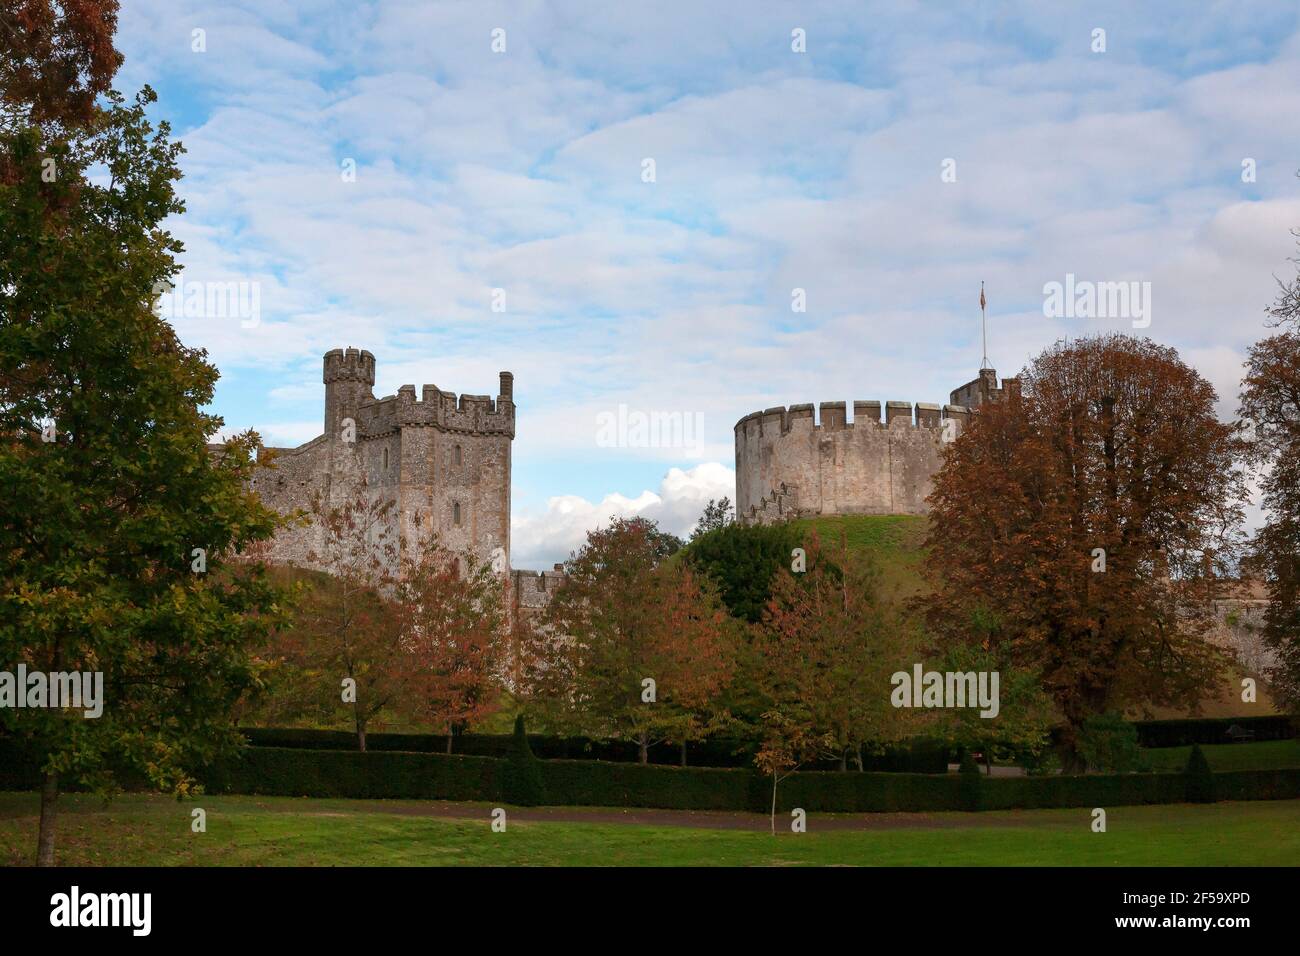 The original Norman motte, surmounted by the 12th century shell keep, and on the left, the 13th century Bevis Tower: Arundel Castle, Sussex, England Stock Photo